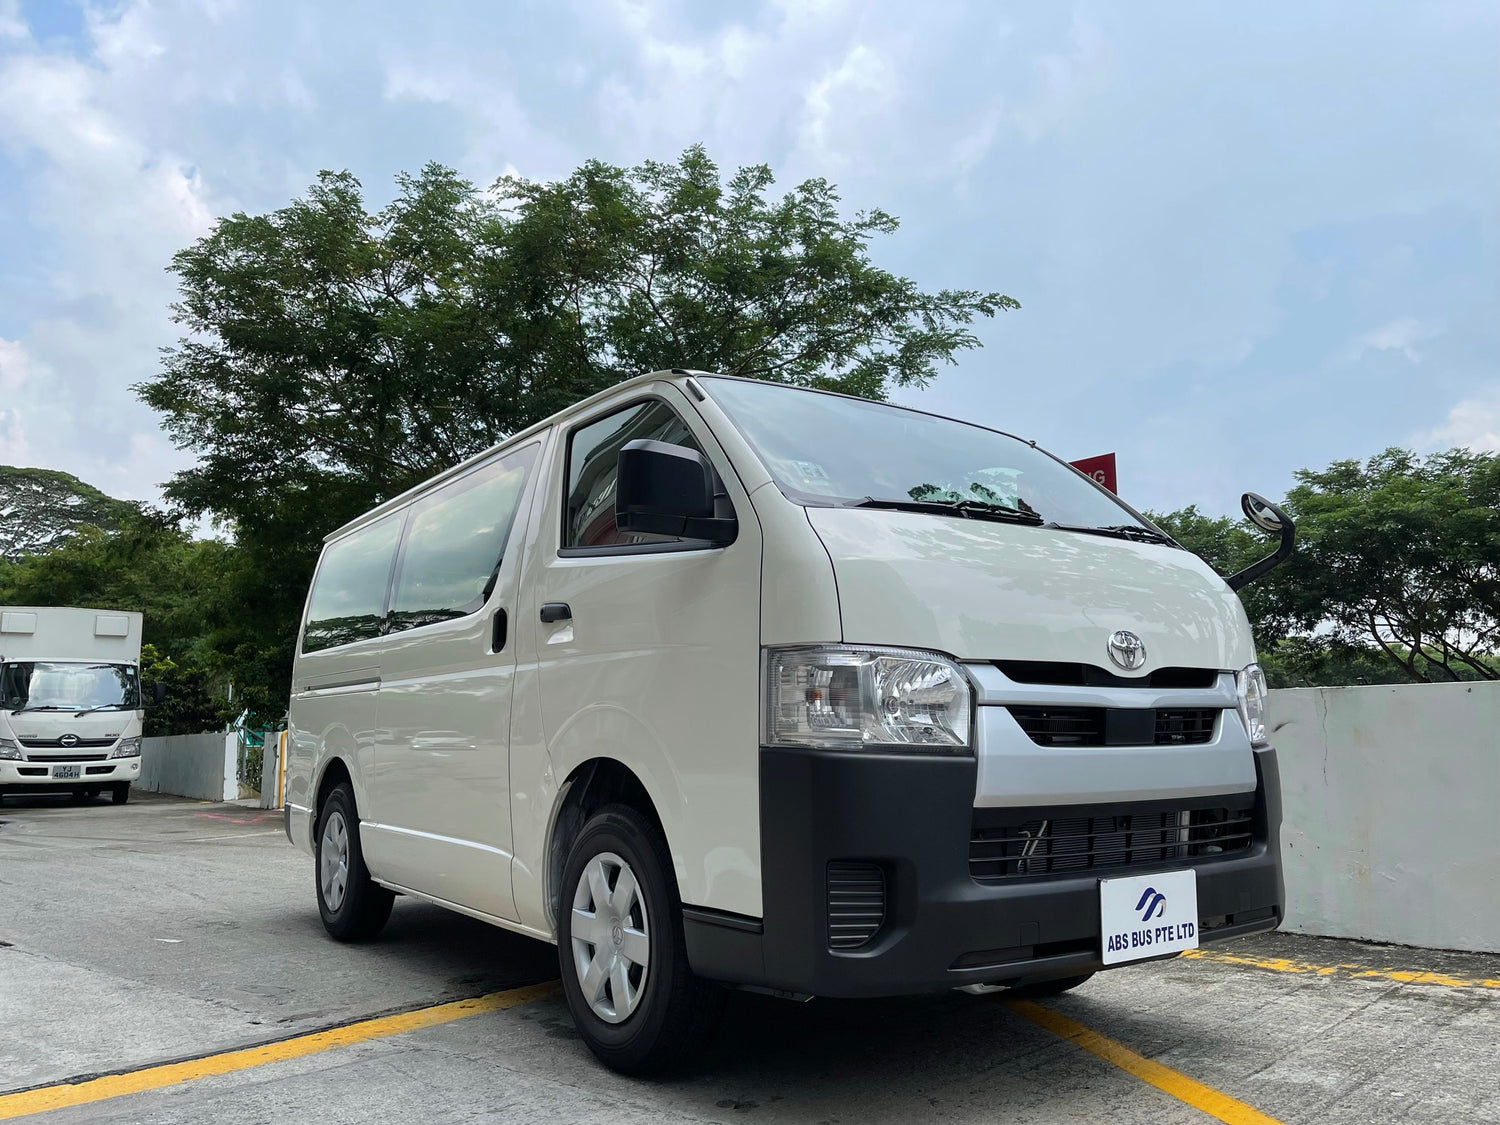 Toyota Hiace 2.8L Auto Diesel Engine With Rear Aircon | Without Rear Aircon